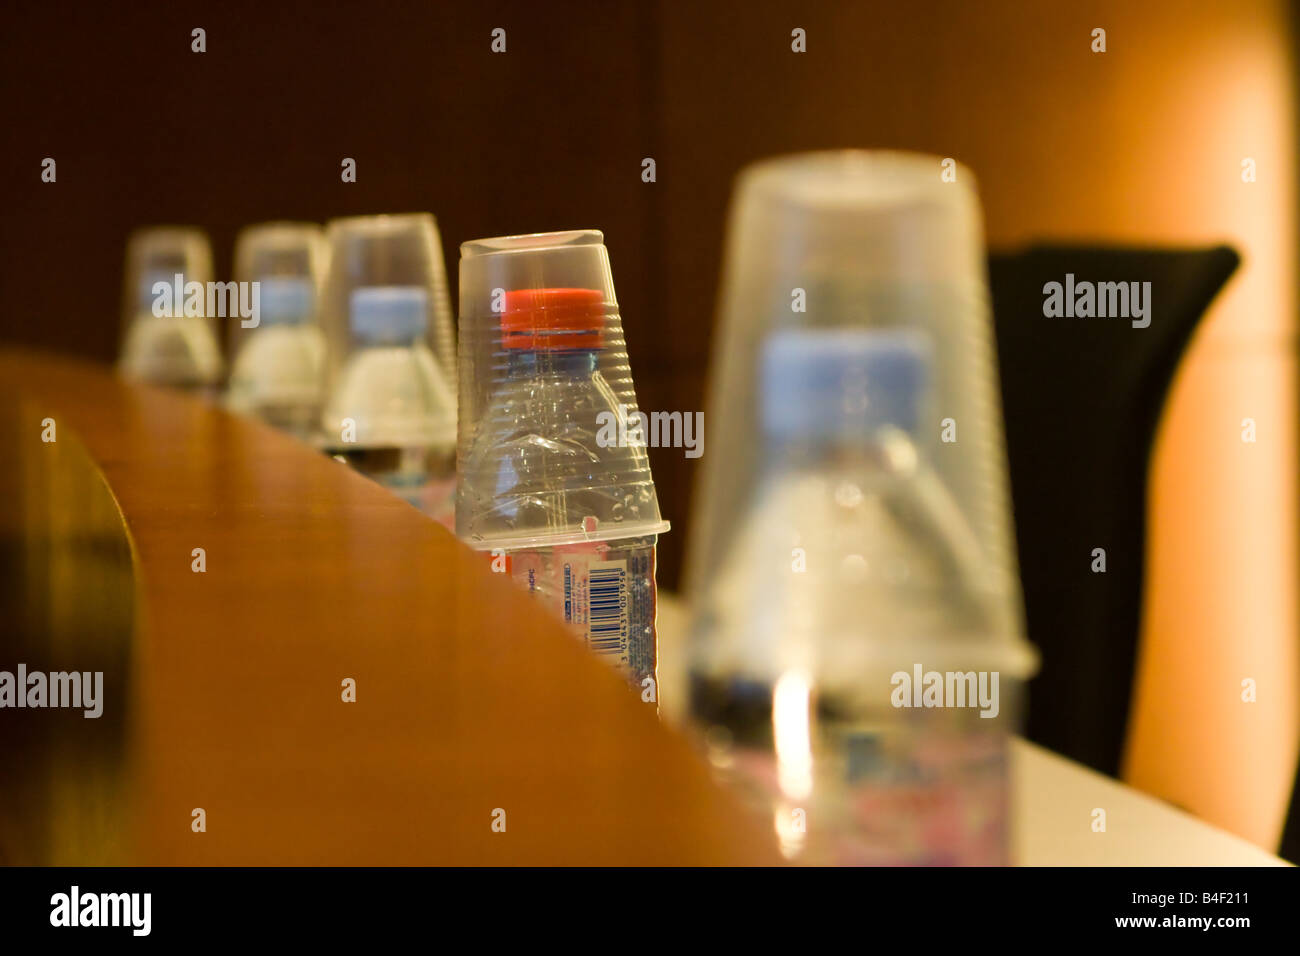 https://c8.alamy.com/comp/B4F211/a-row-of-bottled-water-bottles-and-plastic-drinking-cups-in-an-auditorium-B4F211.jpg